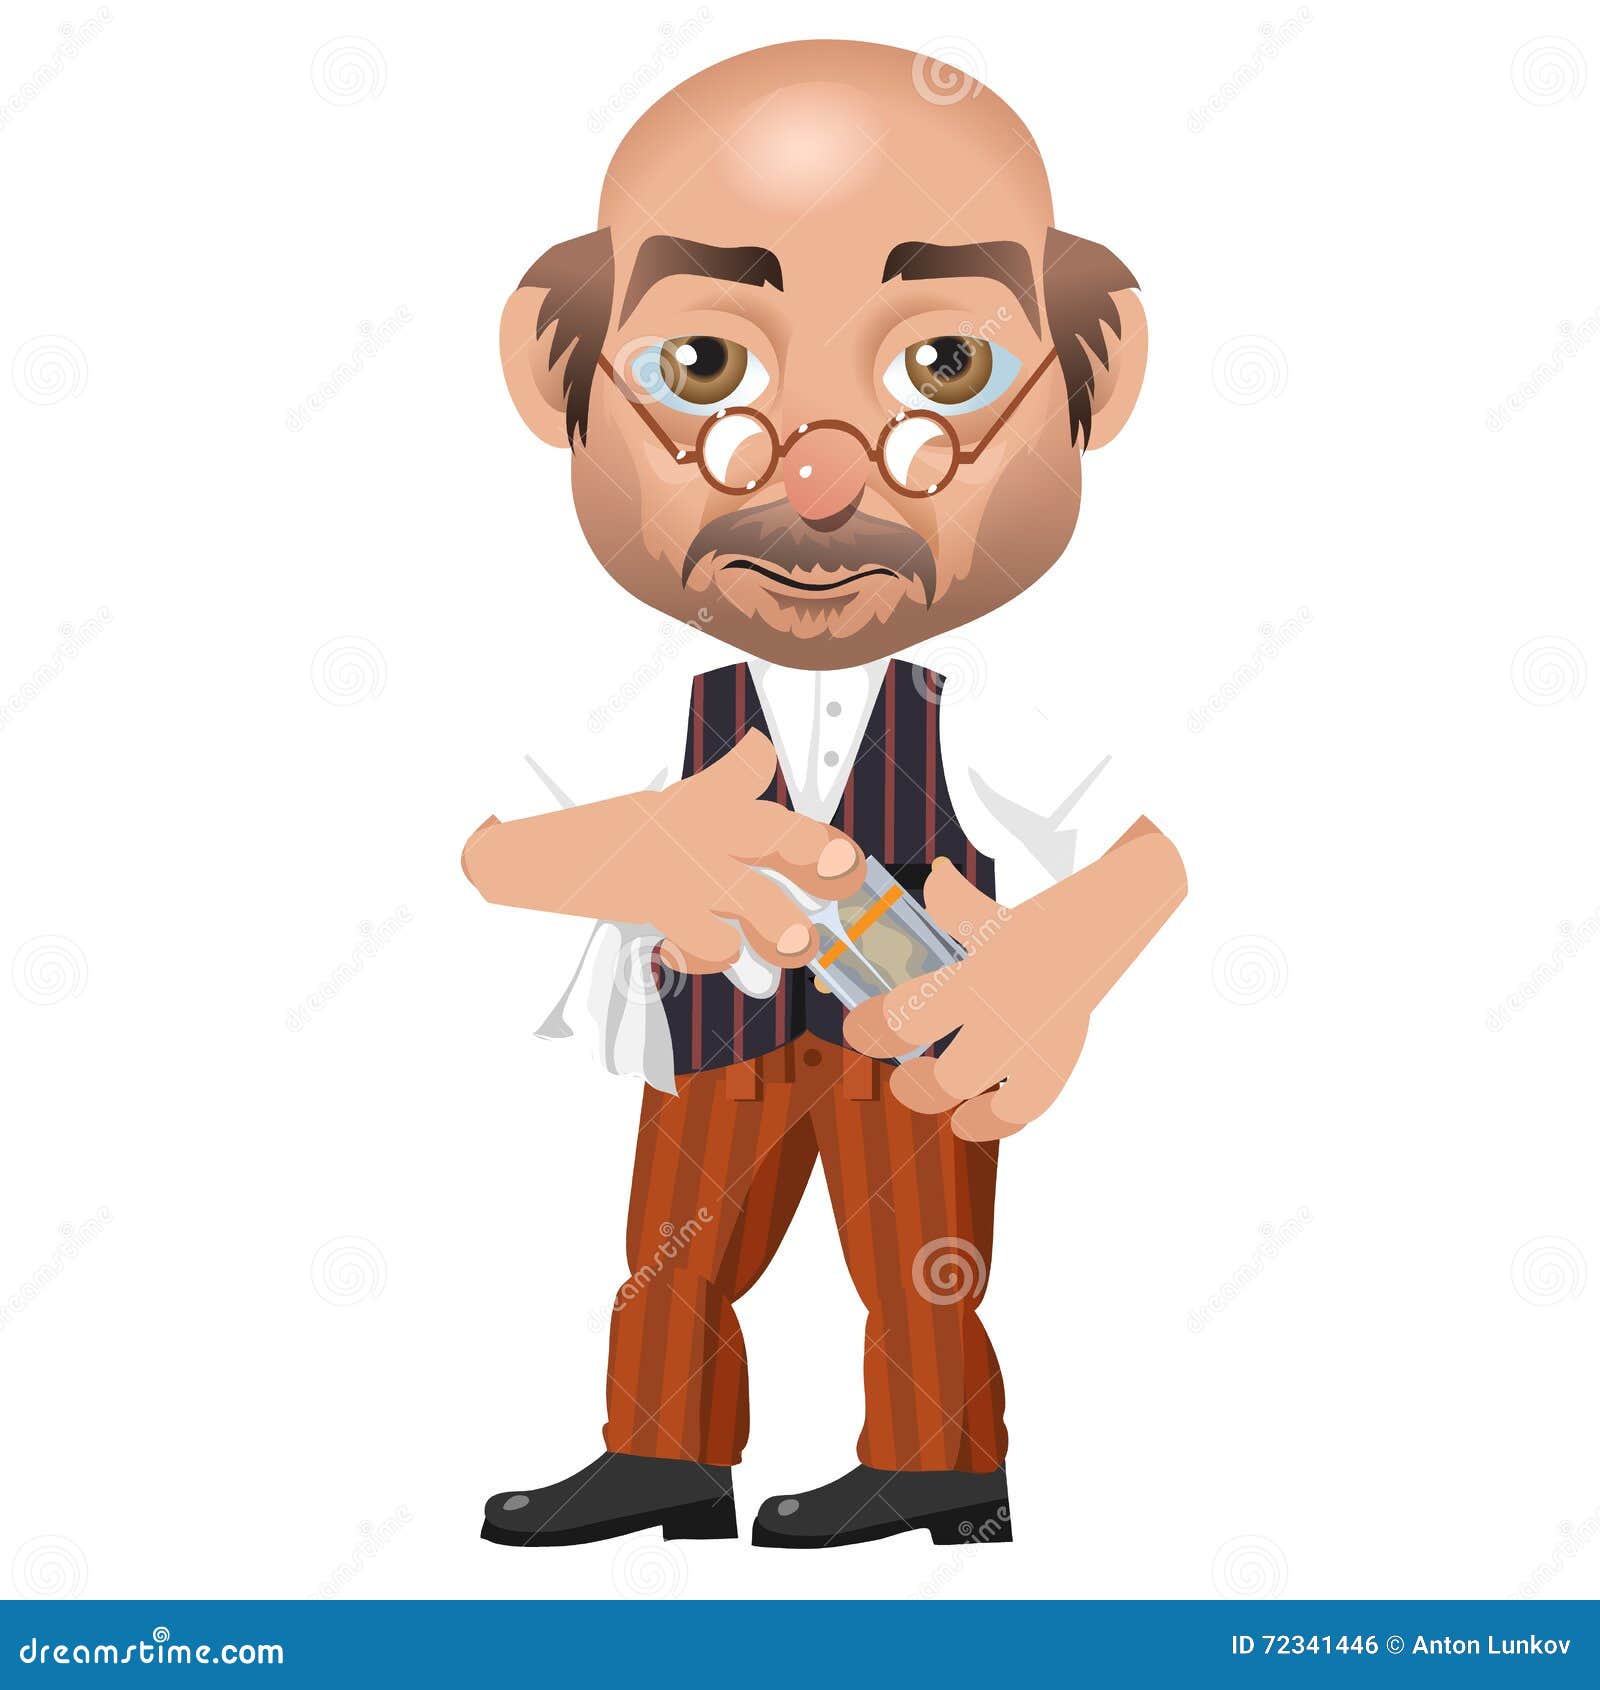 Bald Man with Glasses, Bartender in a Vintage Suit Stock Vector